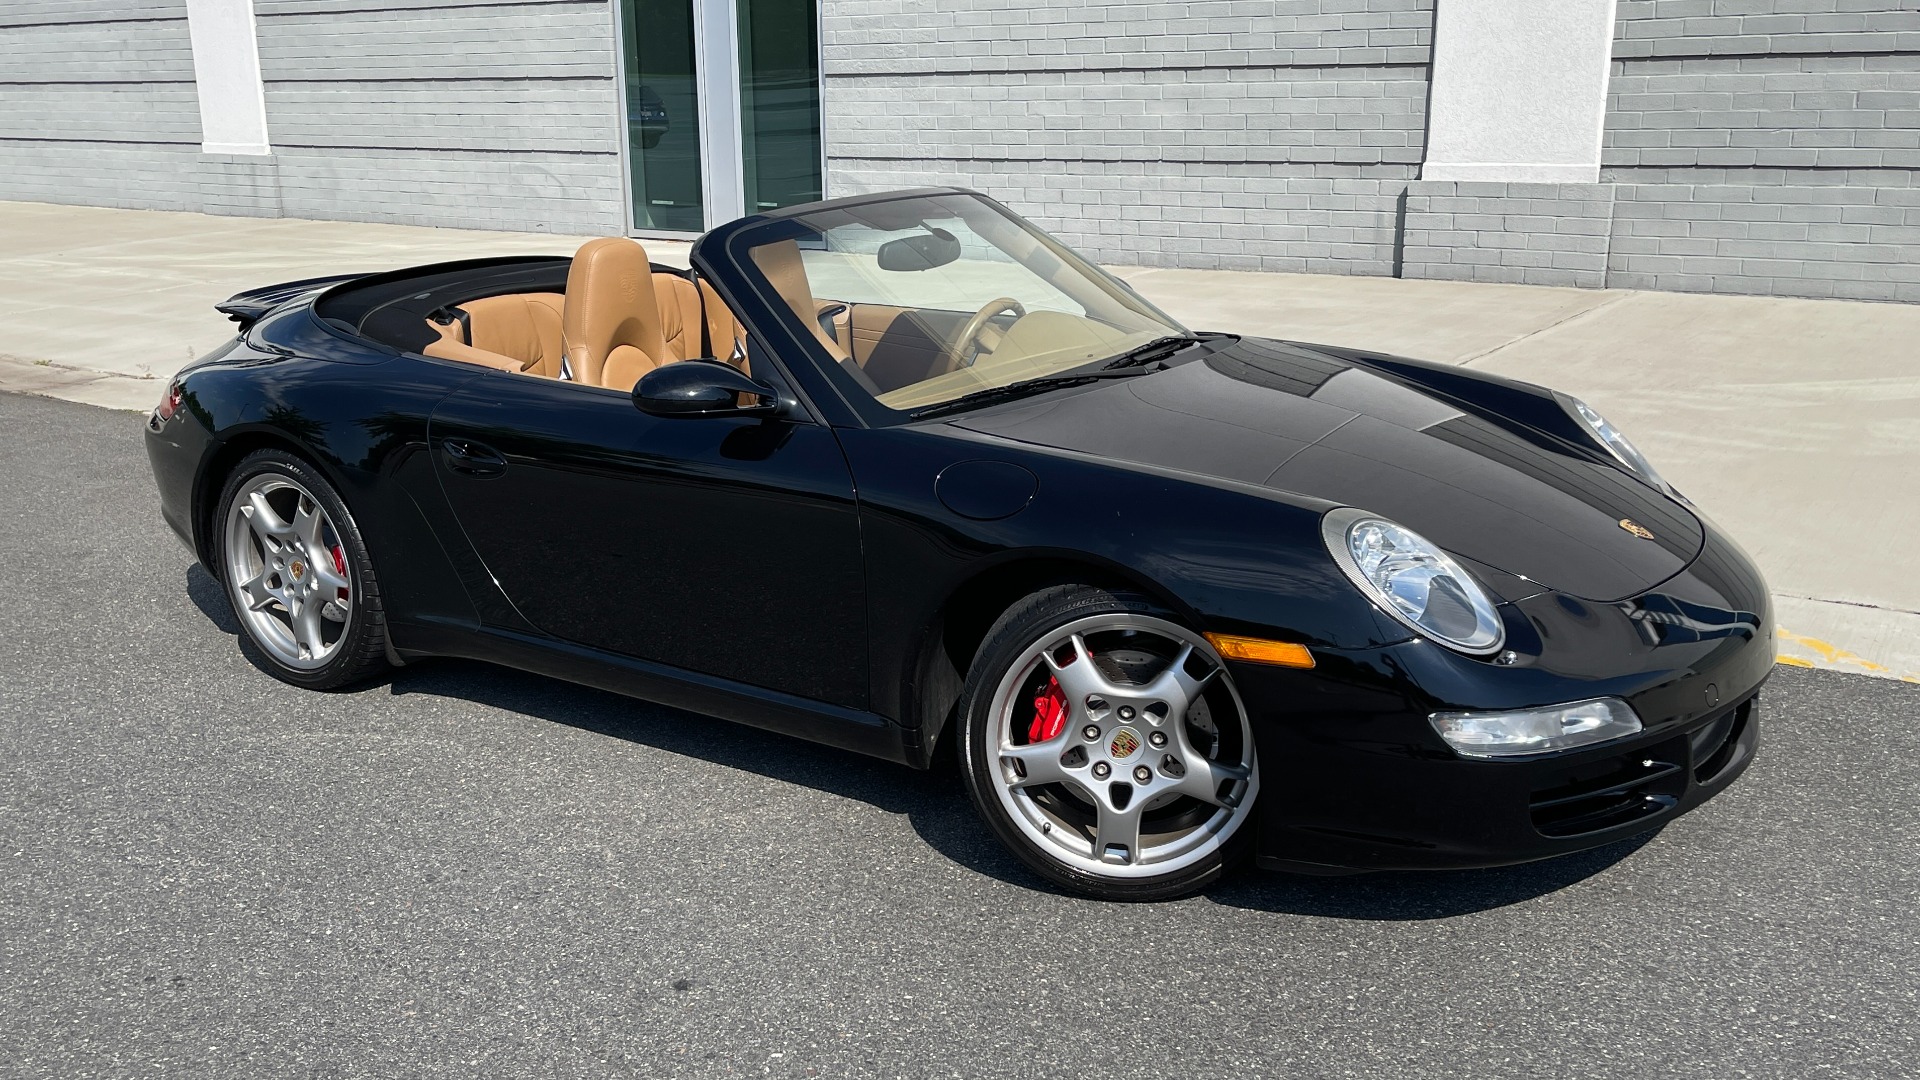 Used 2006 Porsche 911 CARRERA S CABRIOLET / BOSE / CD CHANGER / PWR SEAT PKG / HTD STS for sale $60,999 at Formula Imports in Charlotte NC 28227 6